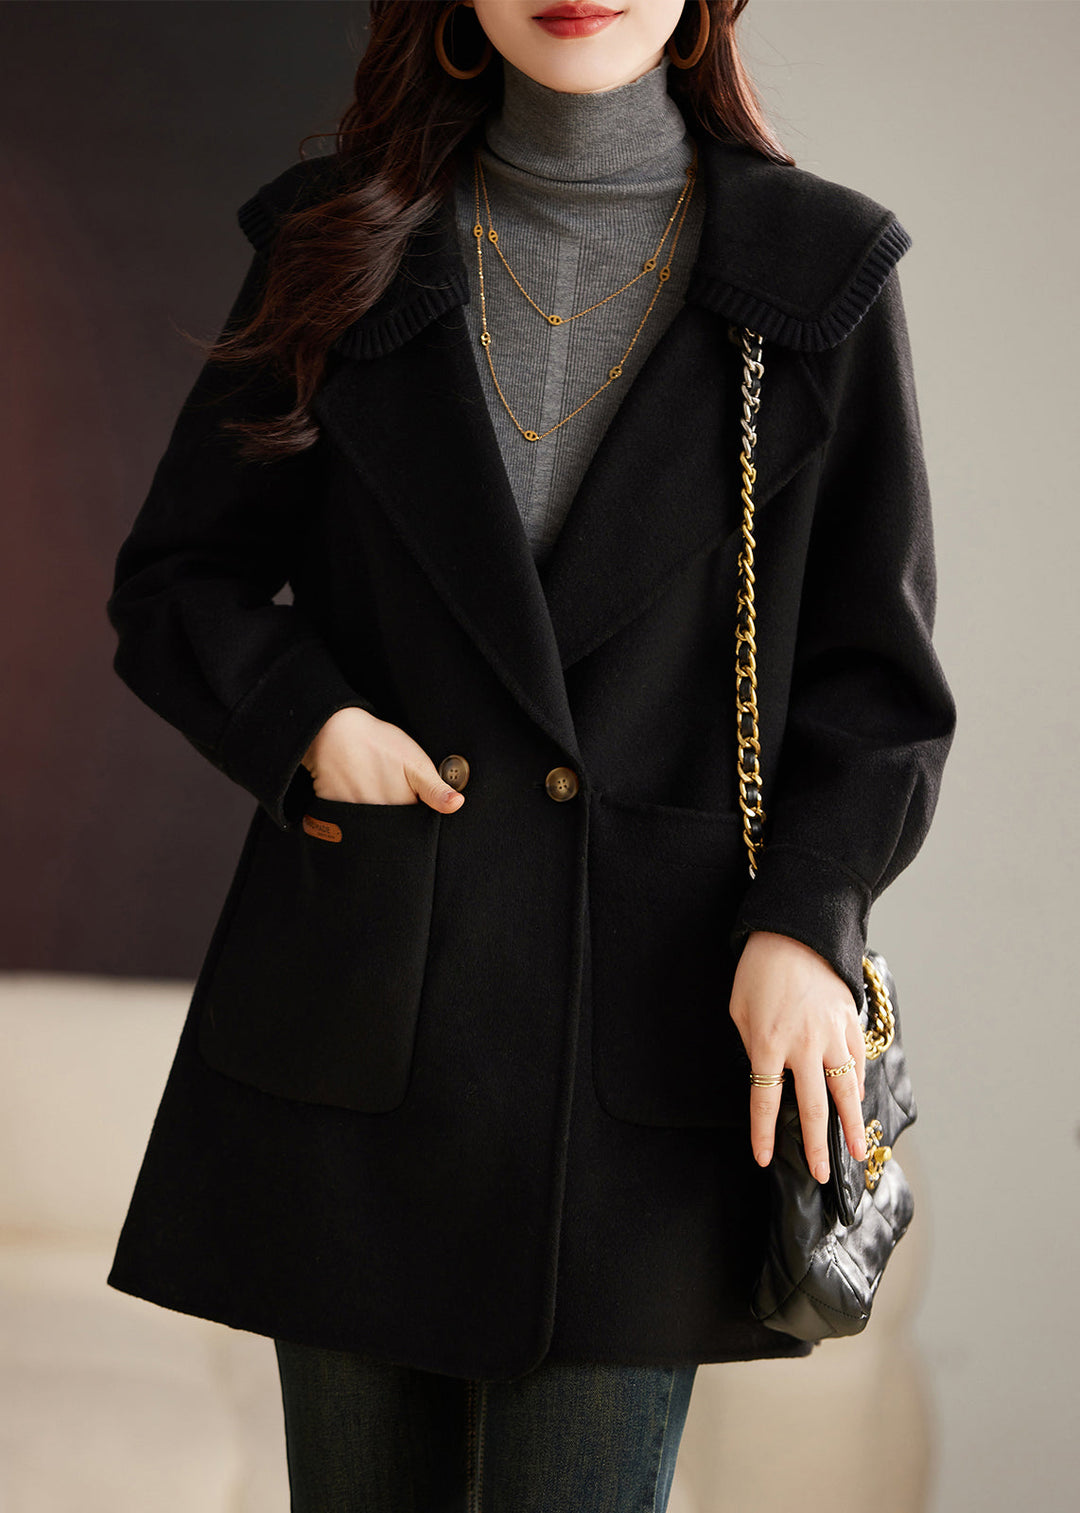 Classy Yellow Button Pockets Patchwork Wool Coat Long Sleeve